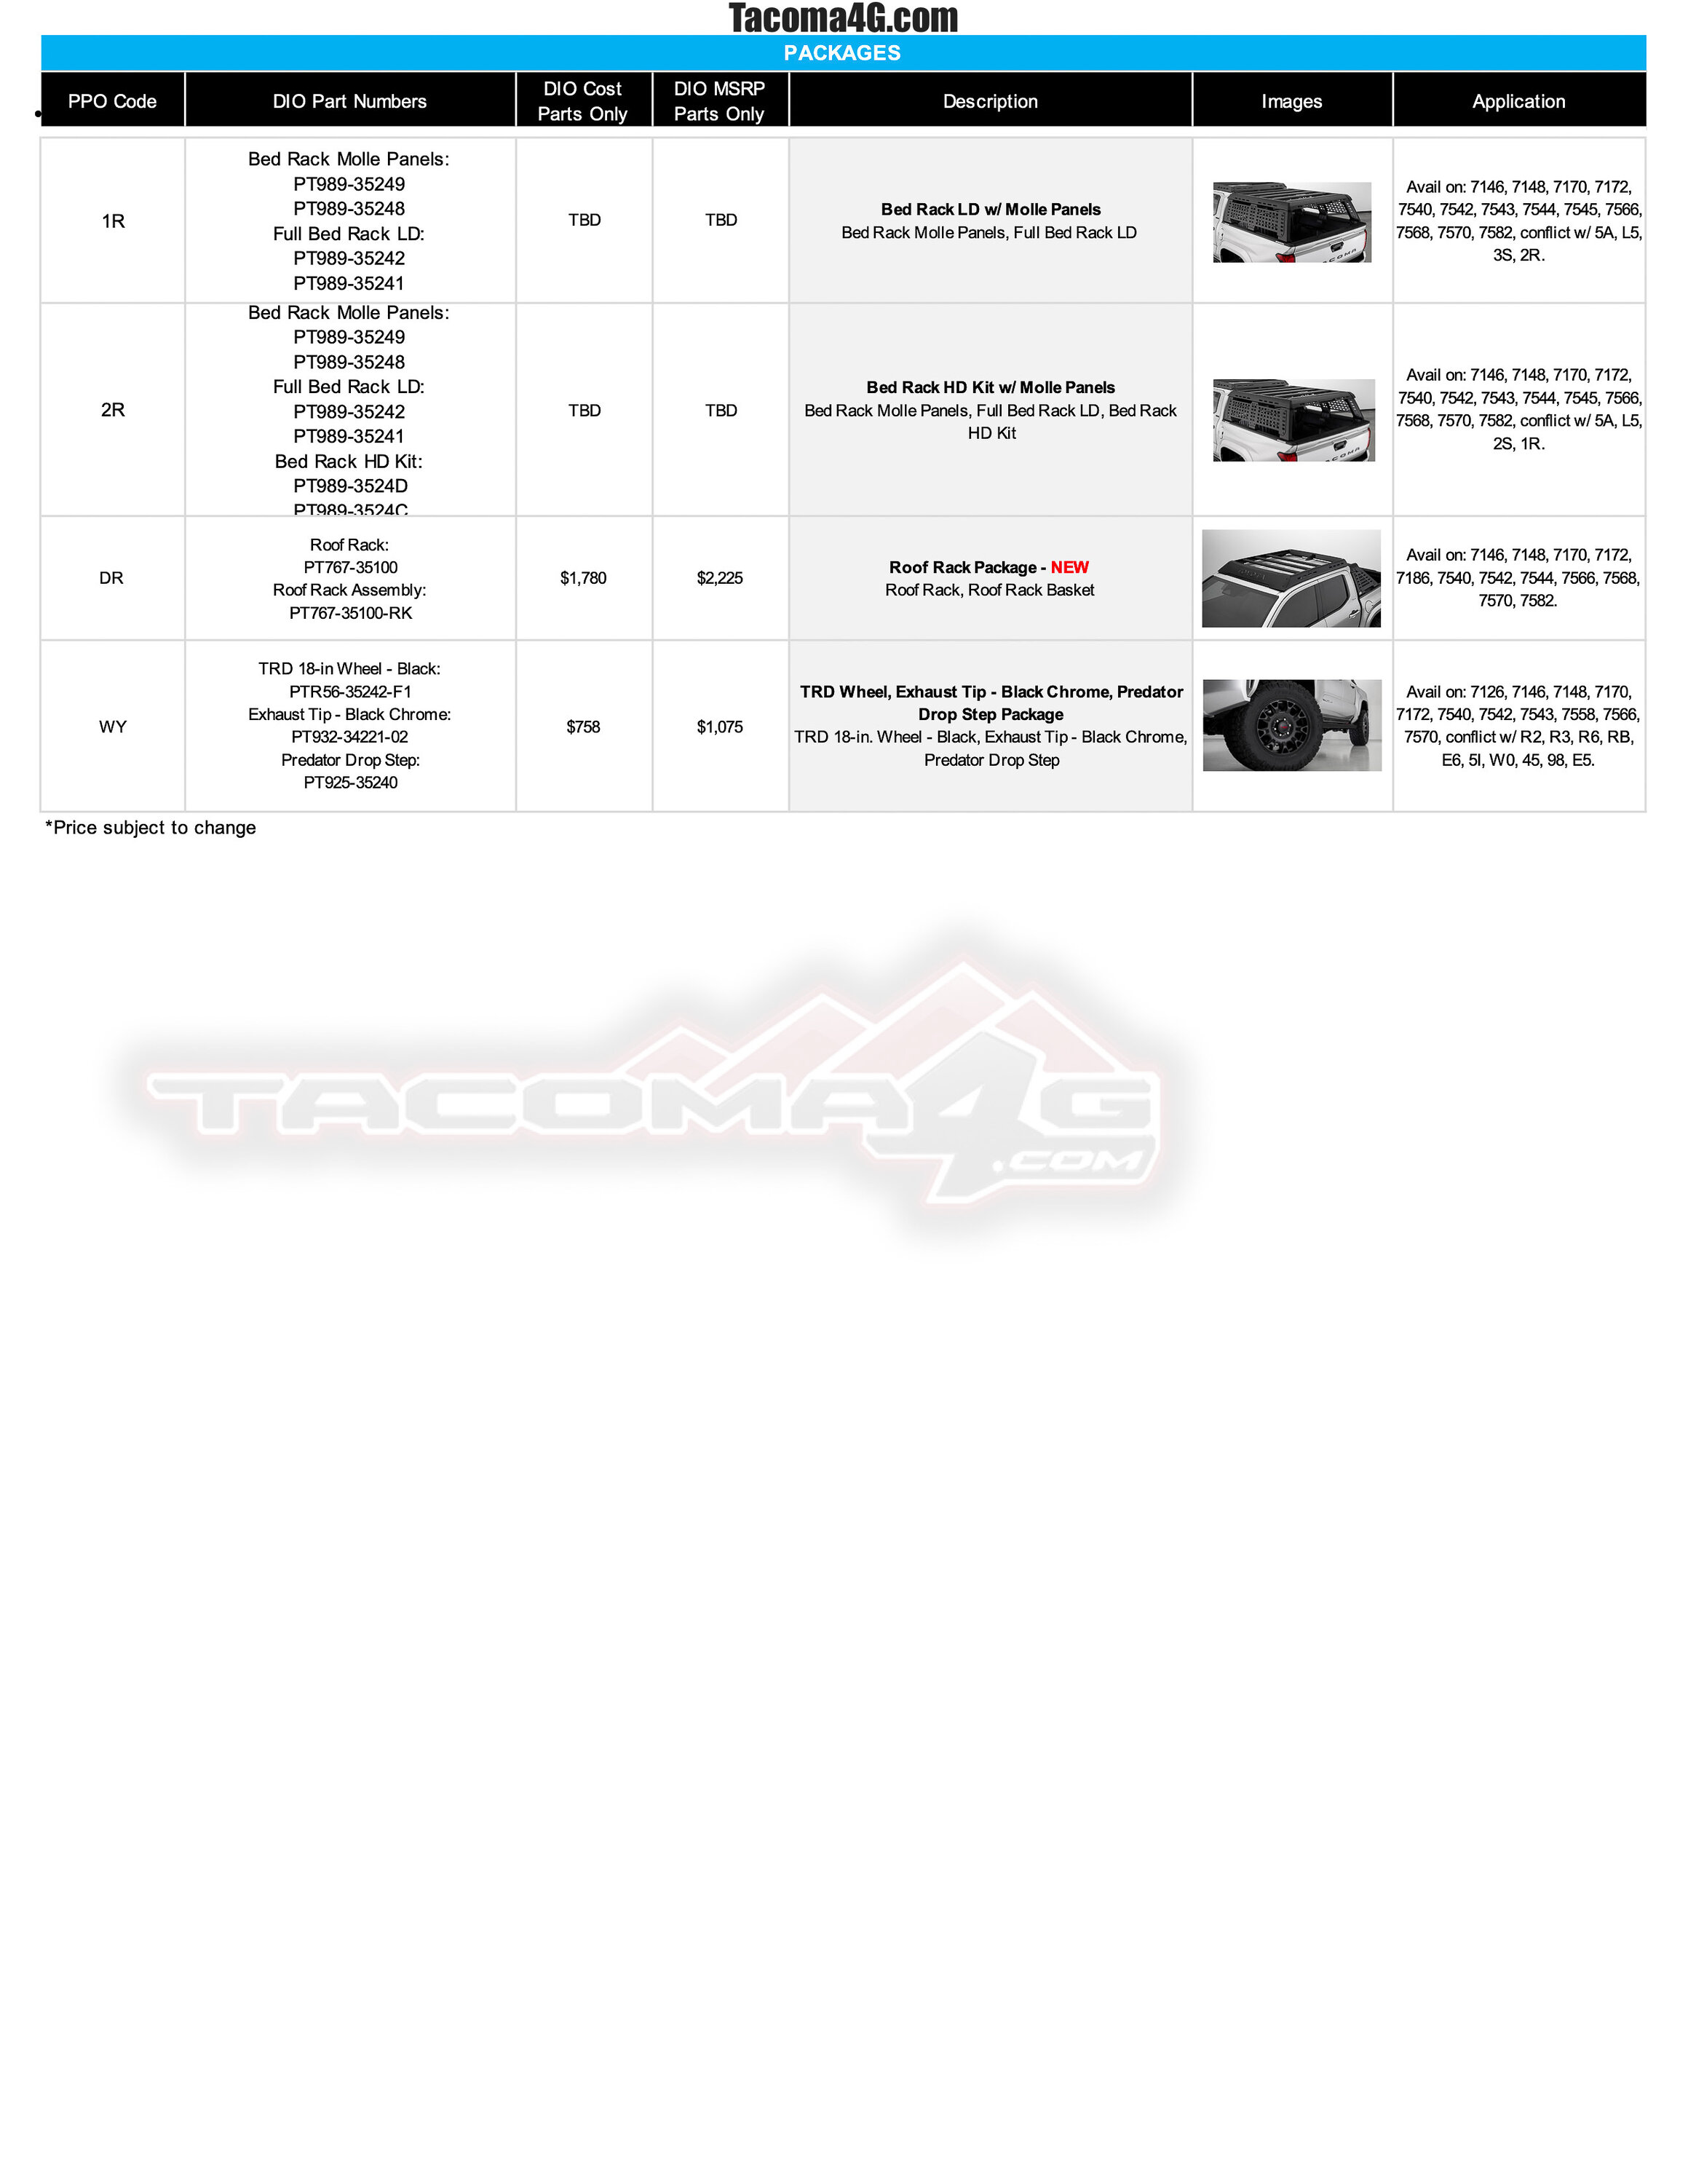 2024 Tacoma 2024 Tacoma Dealer Installed Options (DIO) Accessories Parts Guide + Pricing (Updated 4/2/24) 2024-Tacoma-DIO-Accessories-Parts-Guide_01_31_24-7